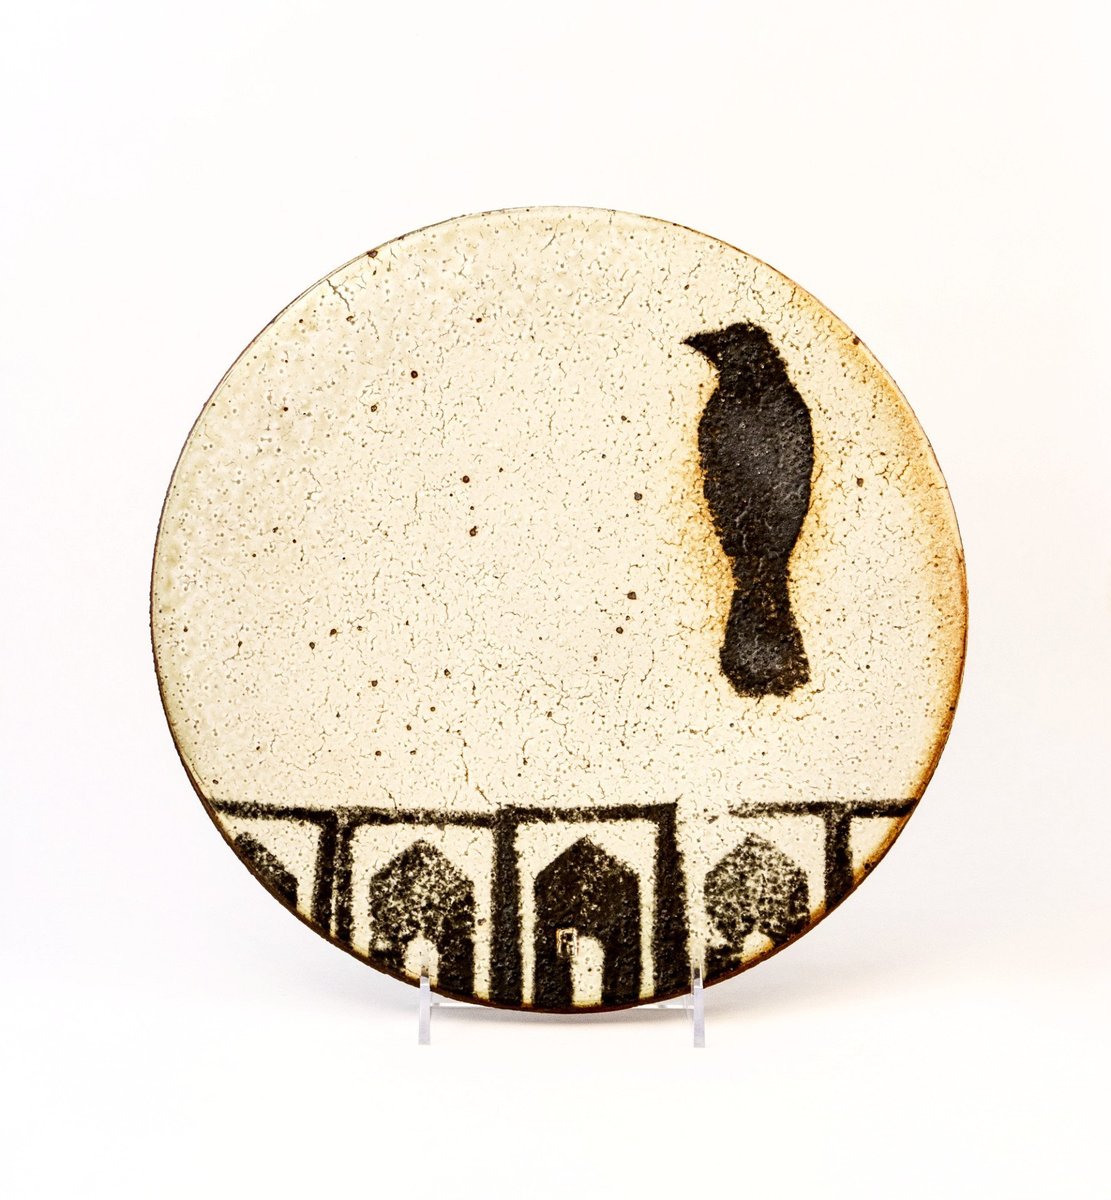 Falter - platter - small bird with houses